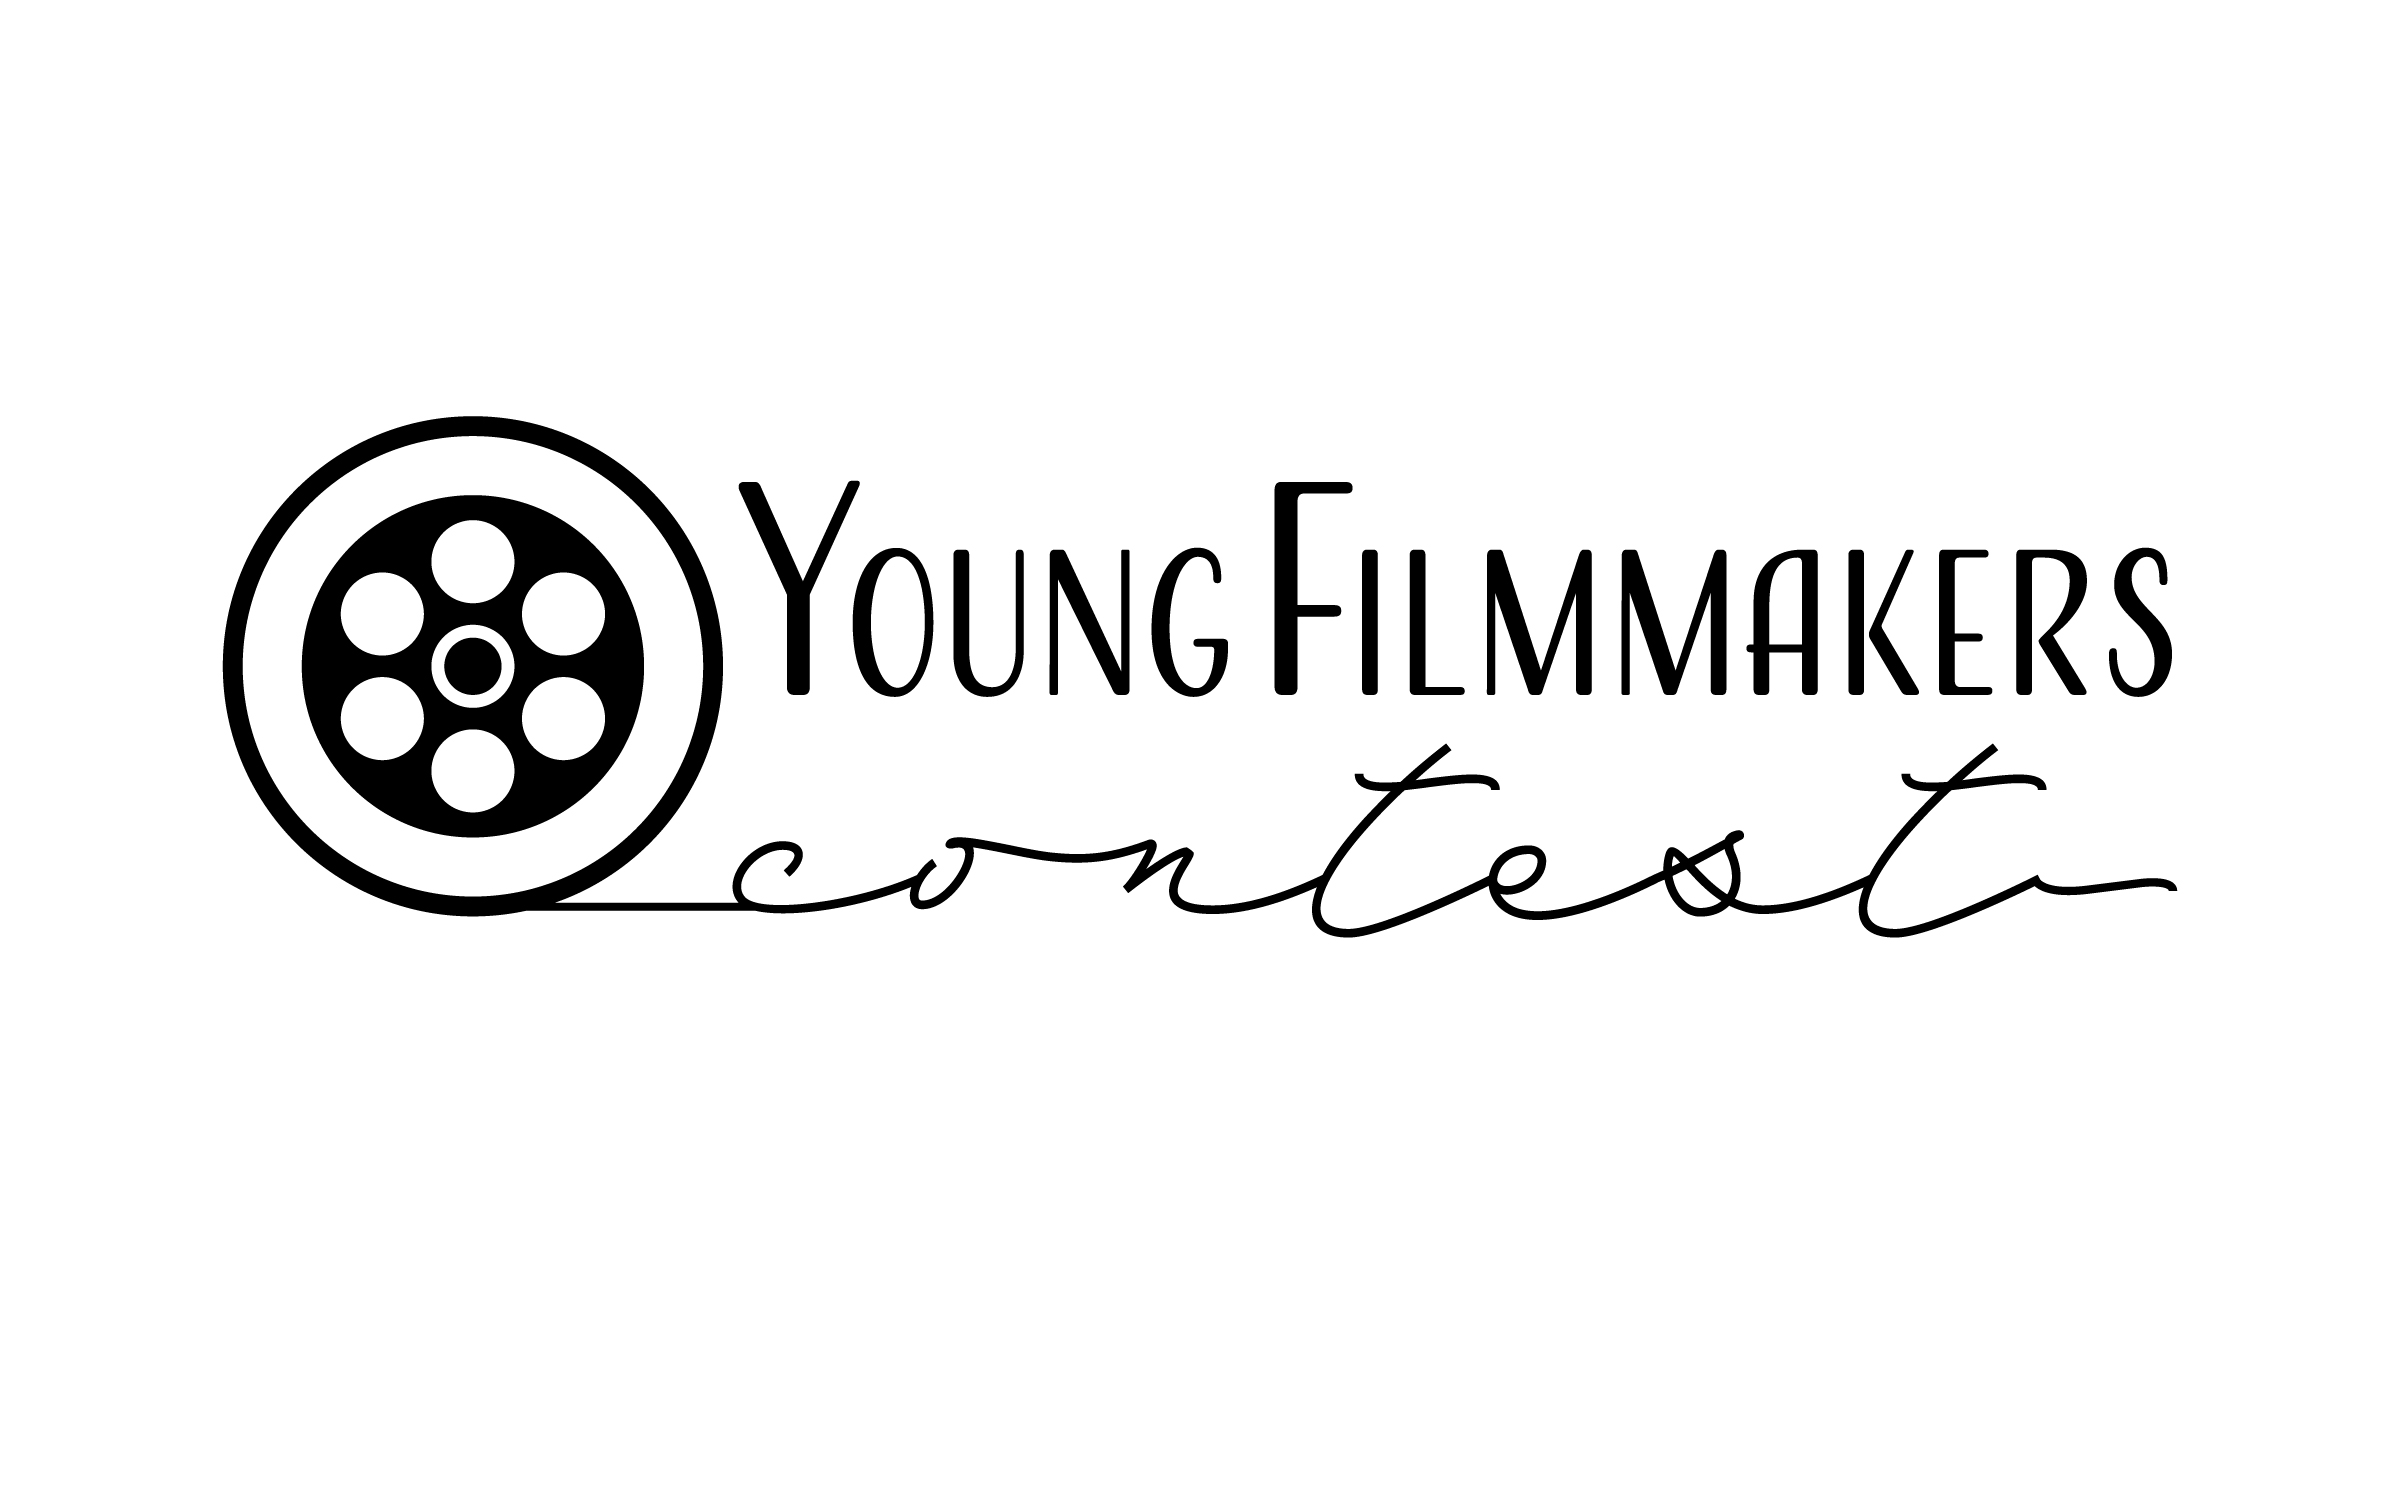 The Jane Austen Society of North America’s Southwest Region Announces Winners of Its 2020 Short Film Contest